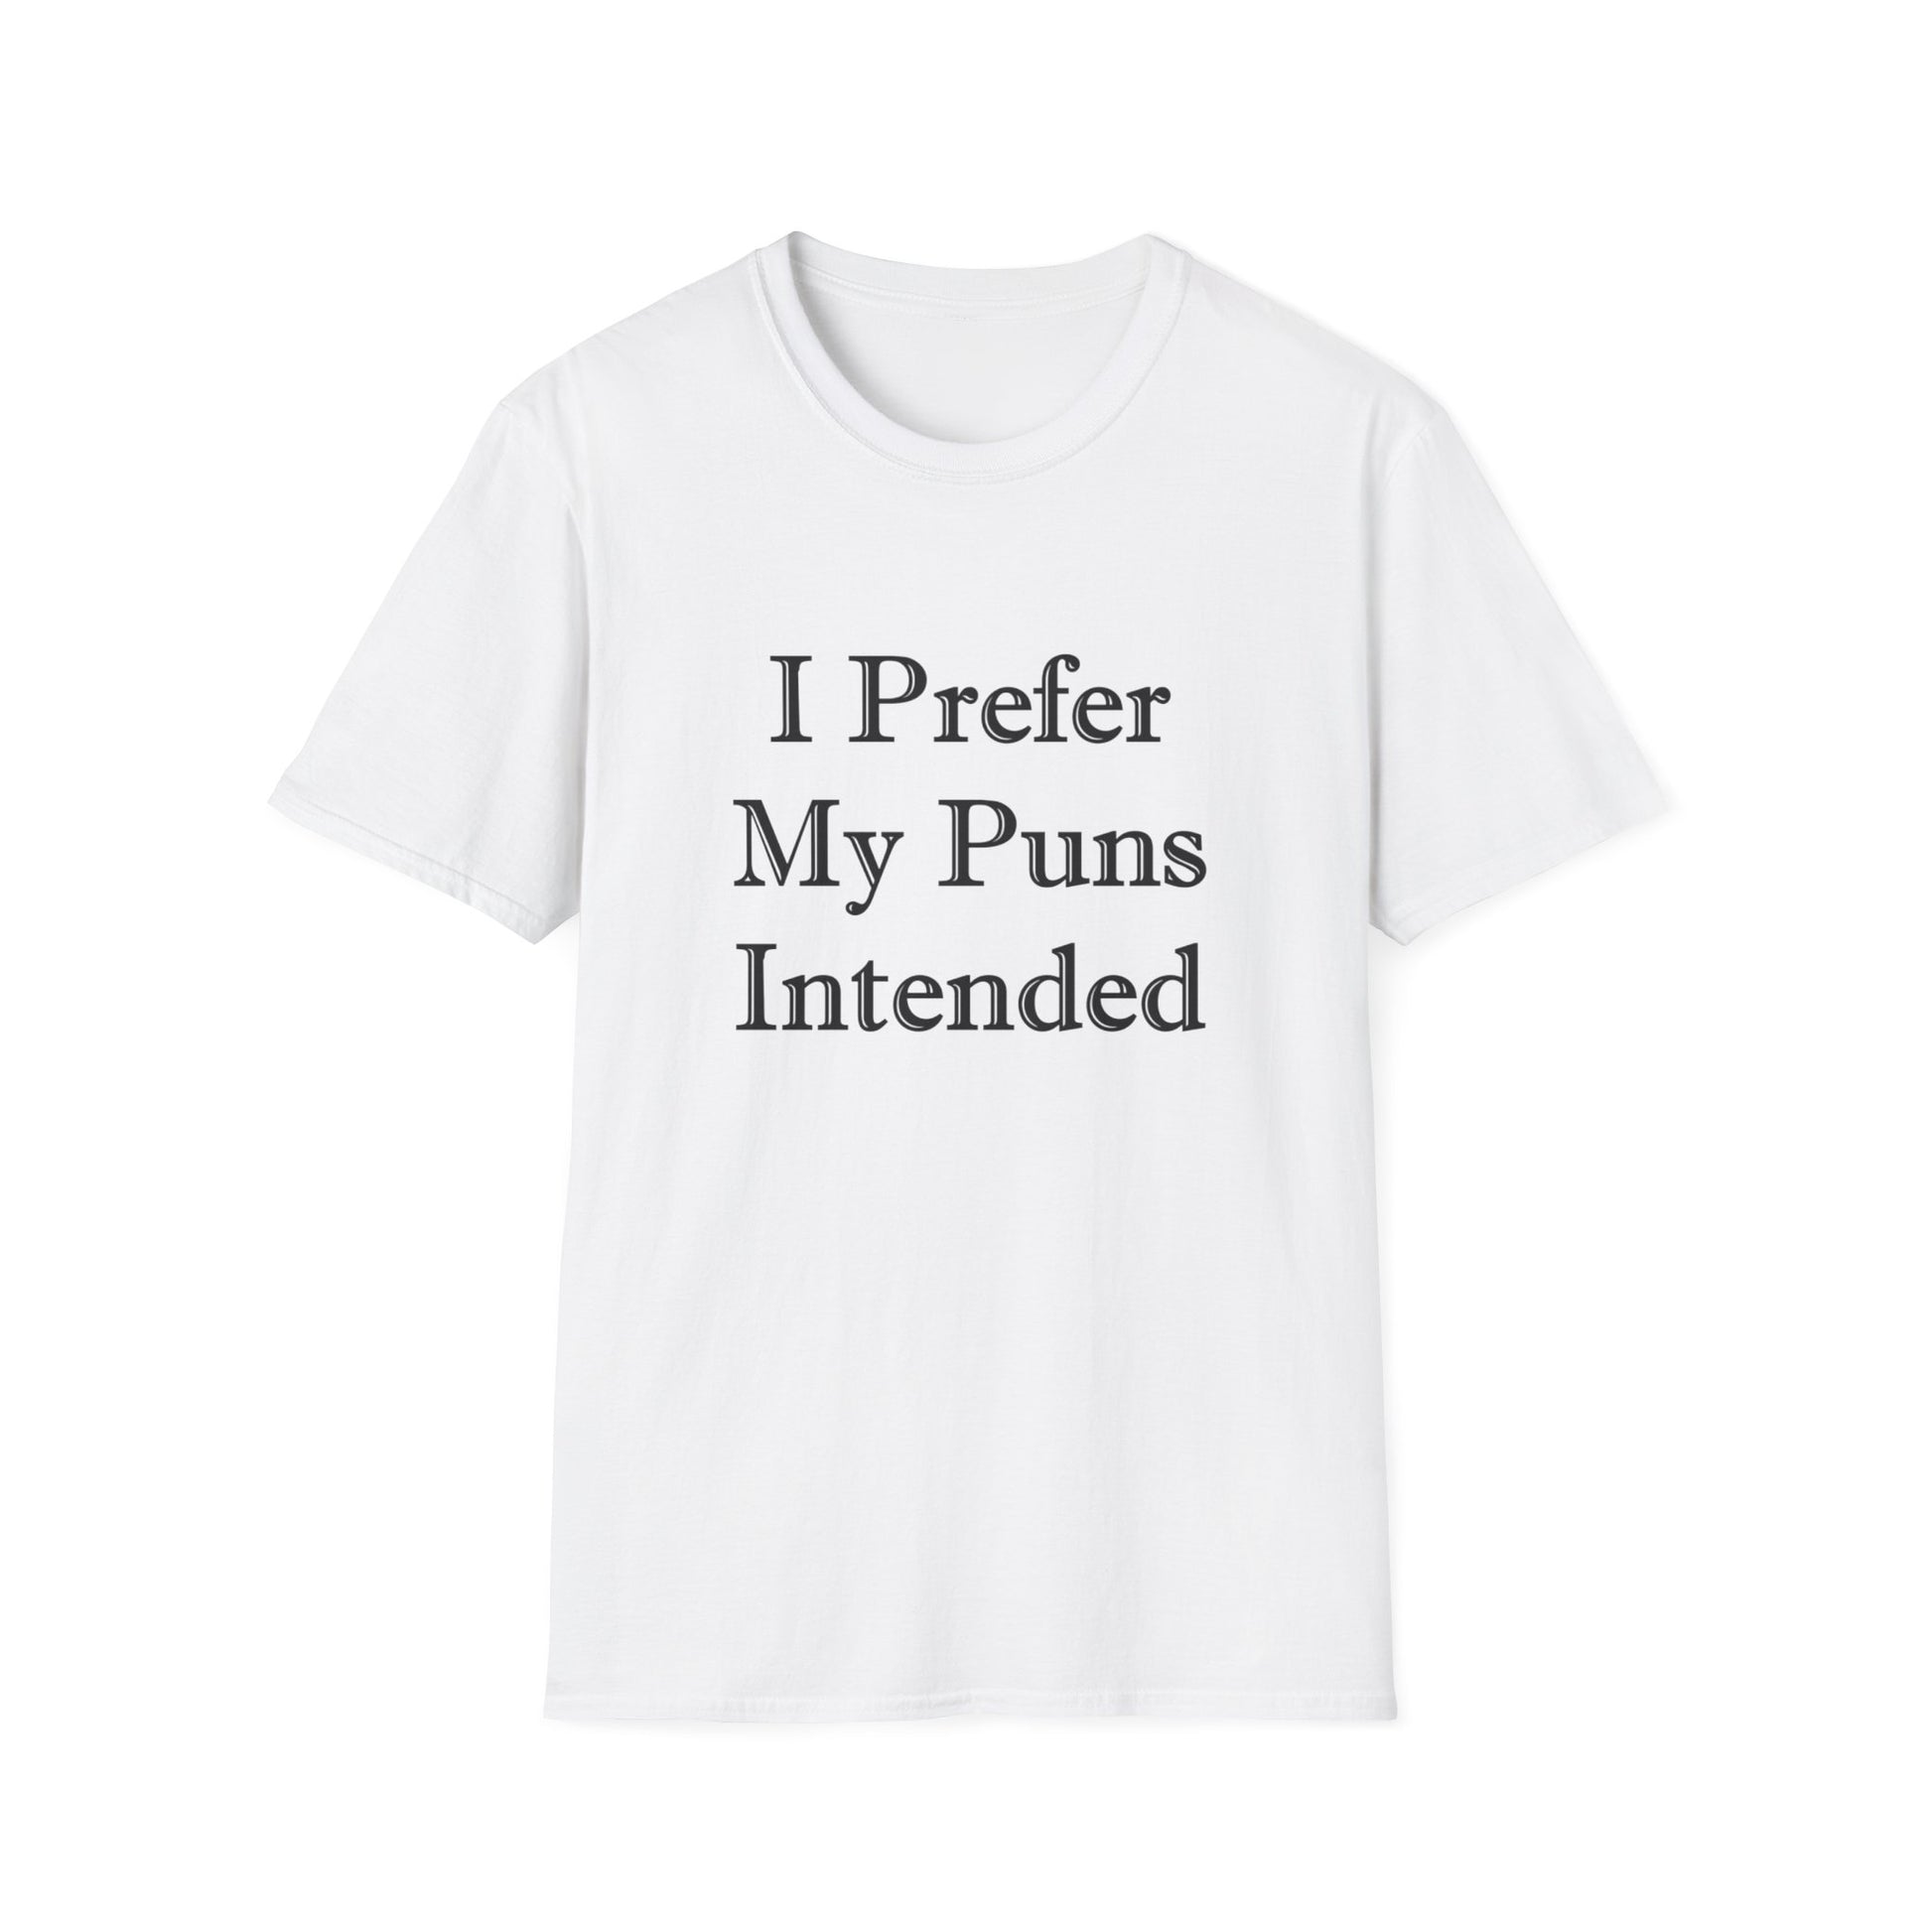 A white t-shirt with the words: I Prefer My Puns Intended